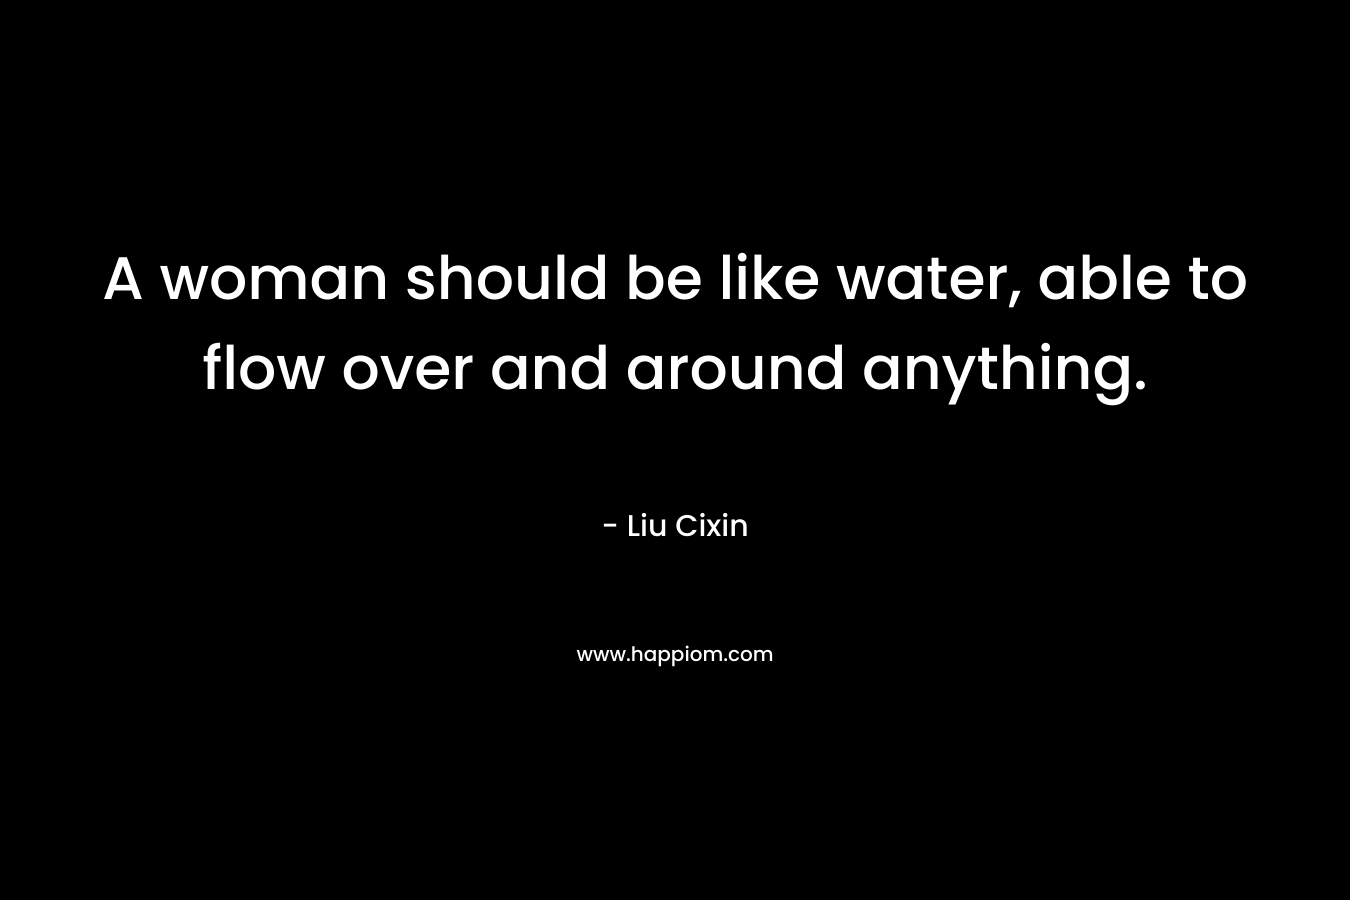 A woman should be like water, able to flow over and around anything.